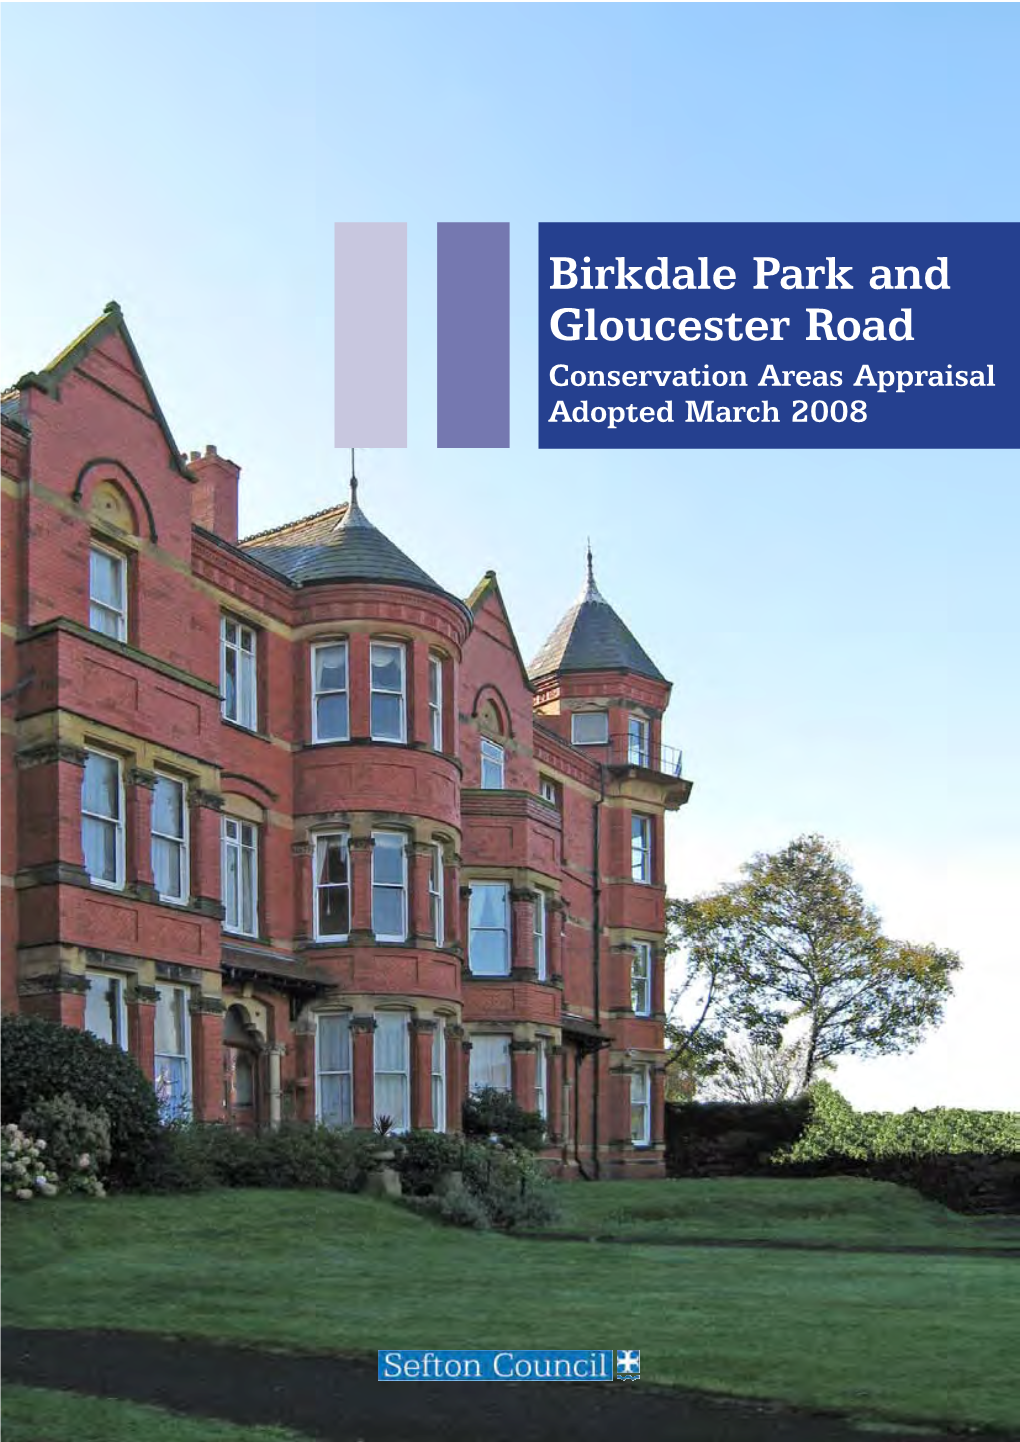 Birkdale Park and Gloucester Road Conservation Areas Appraisal